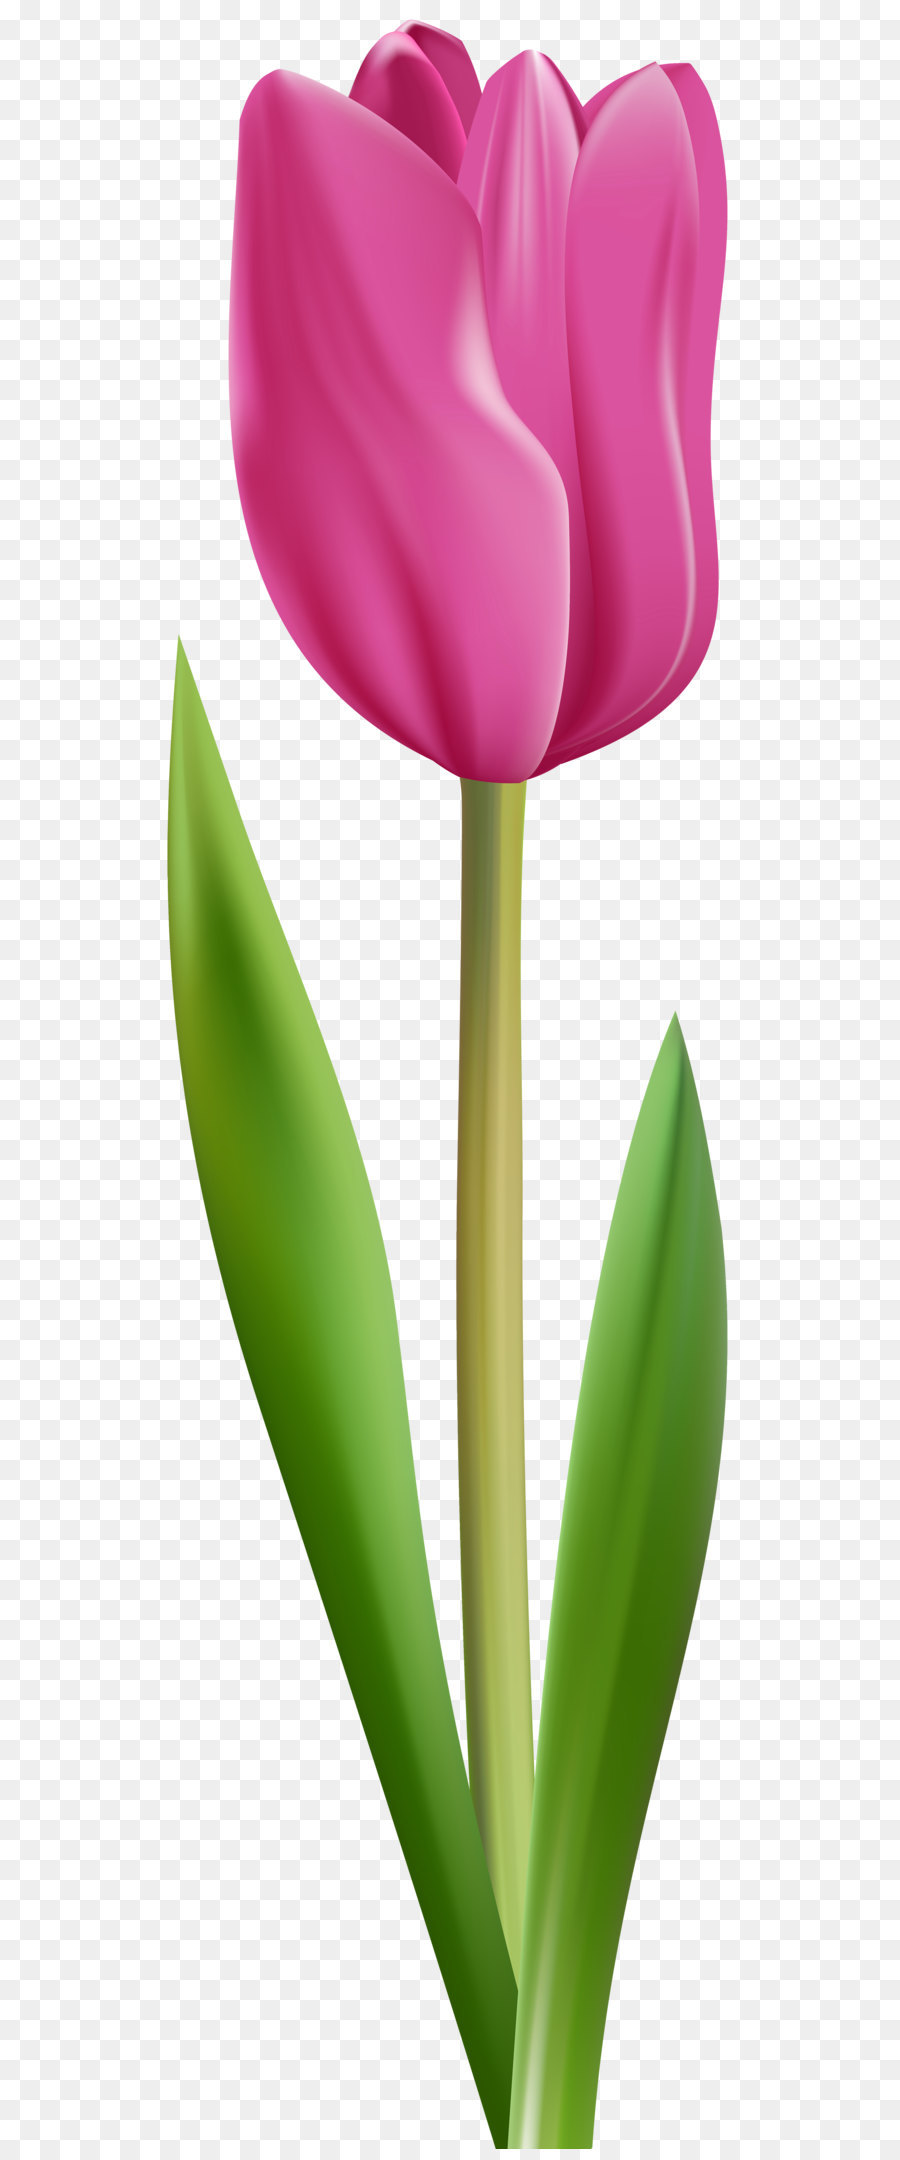 Fountain Valley Tulip Inn Flower Suzani - Tulip Pink Transparent Clip Art Image png download - 2420*8000 - Free Transparent Flower png Download.